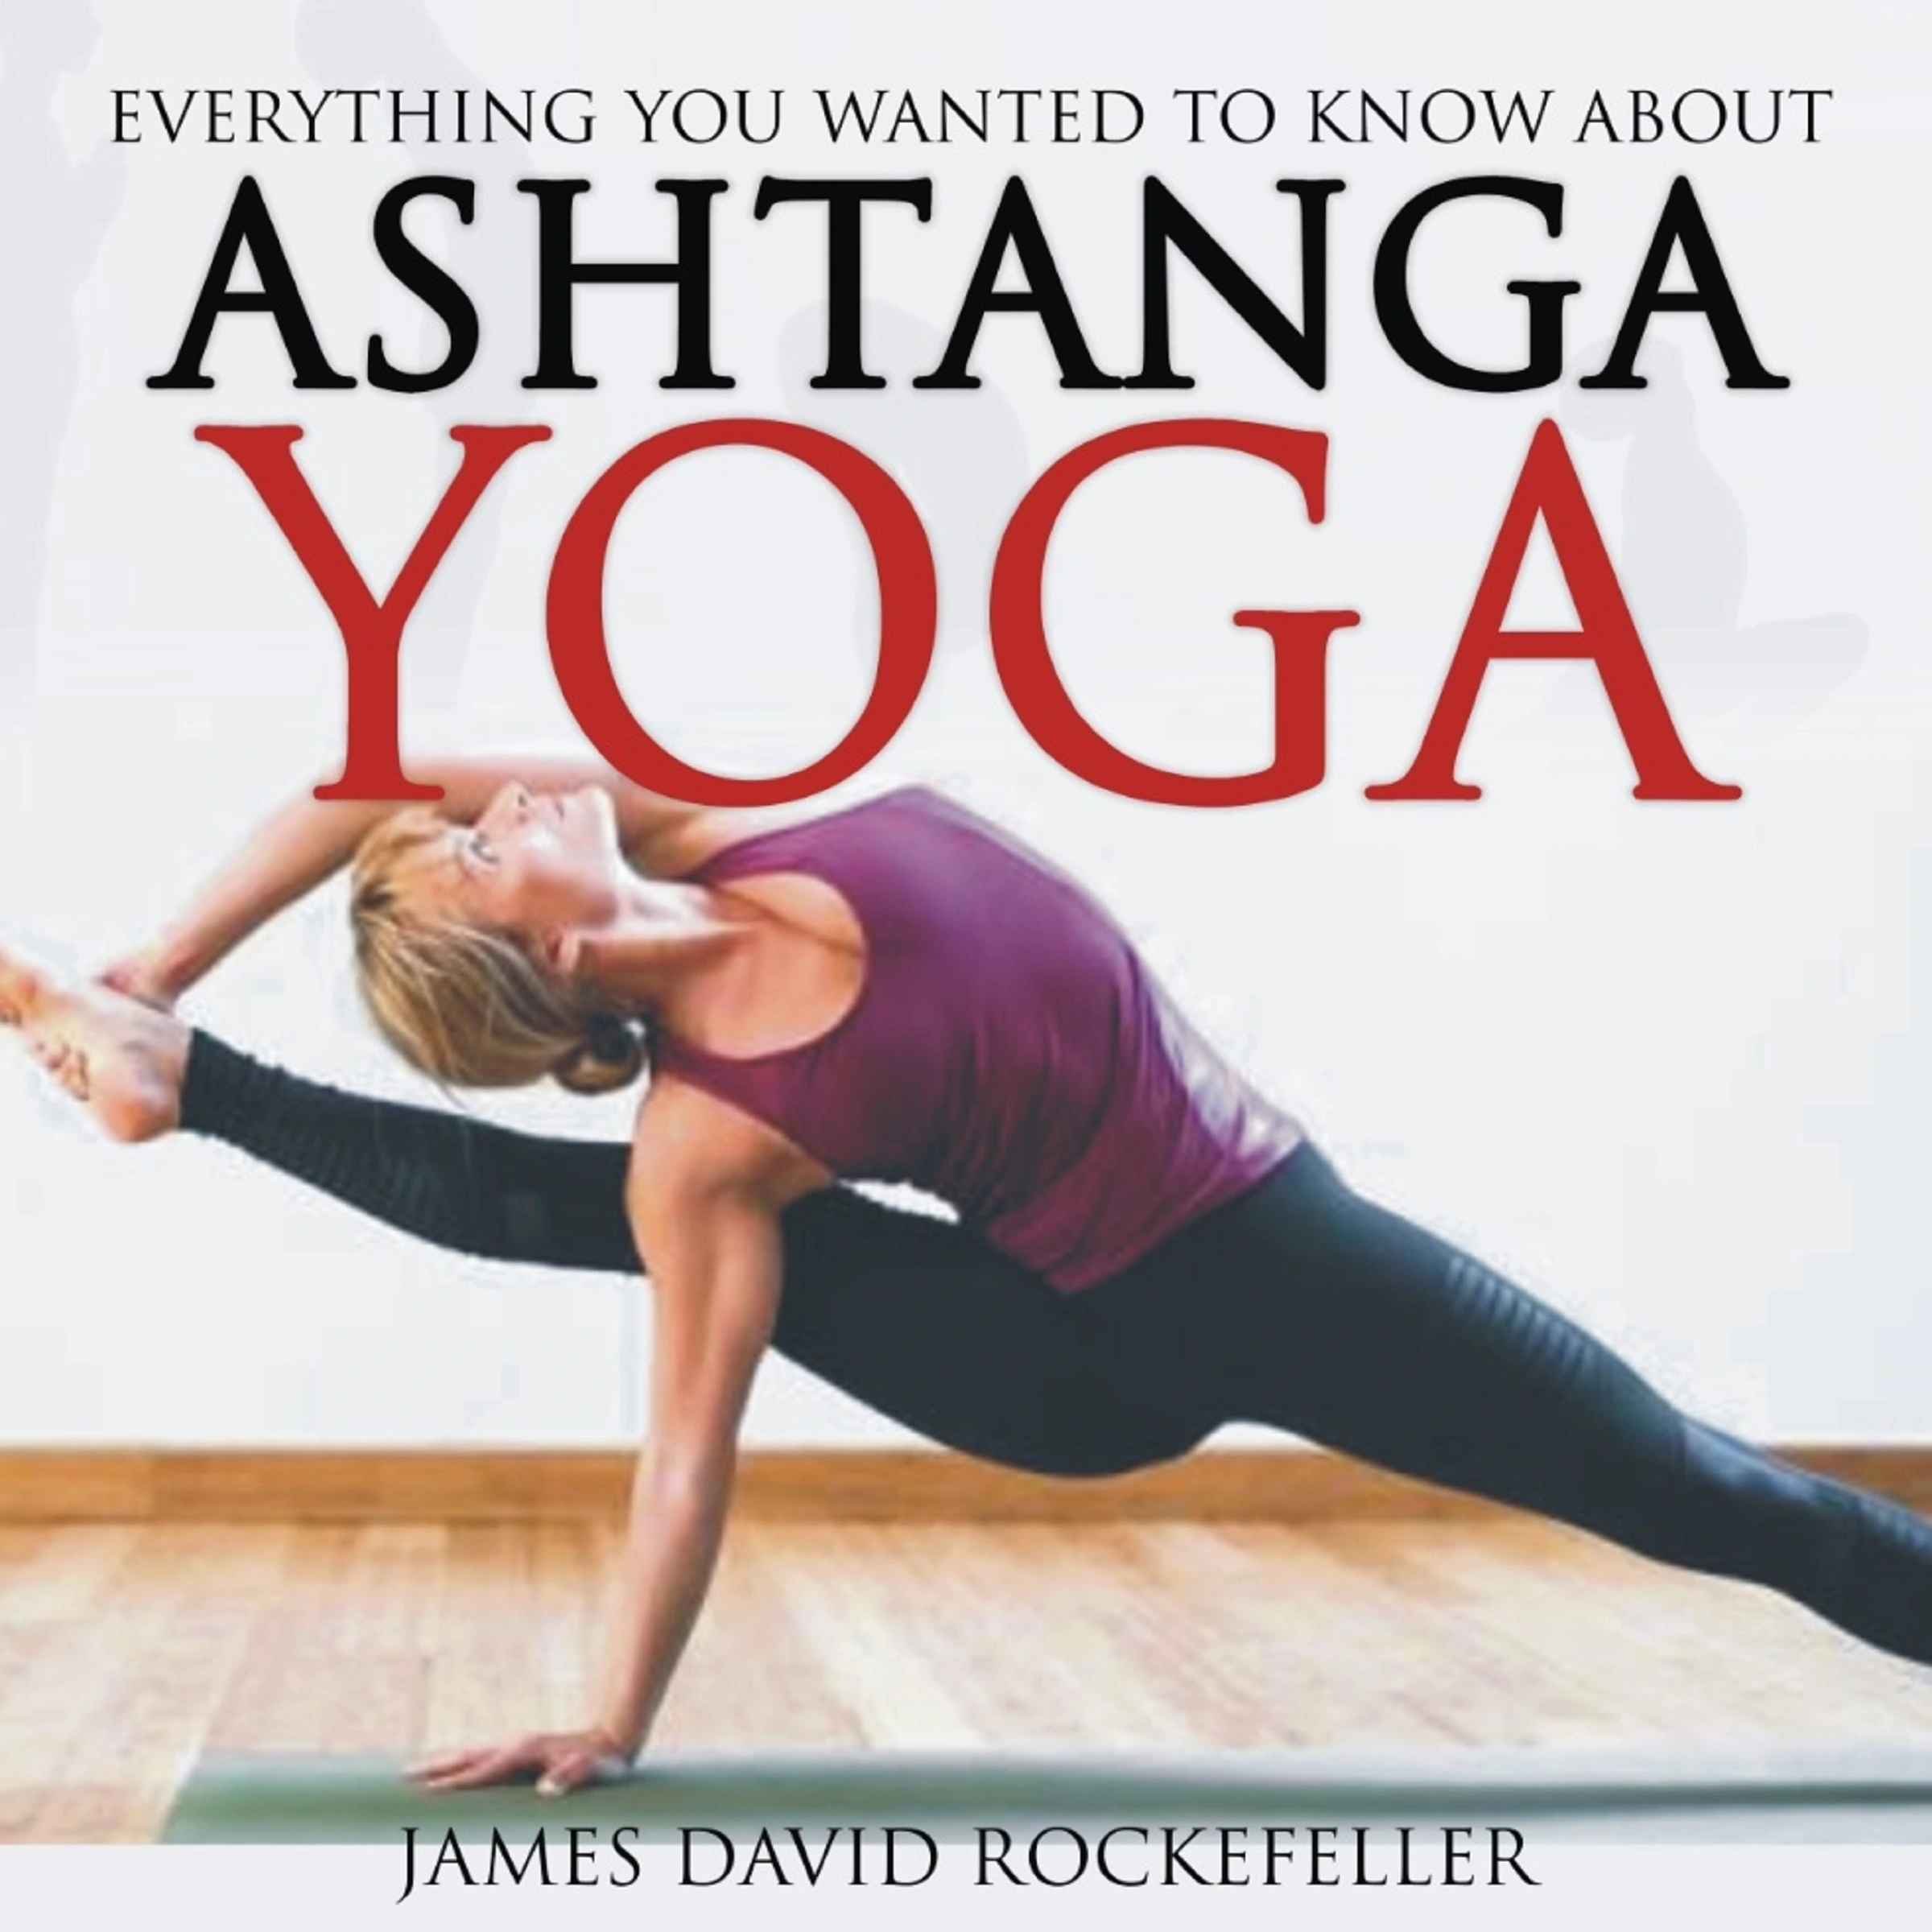 Everything You Wanted to Know About Ashtanga Yoga Audiobook by James David Rockefeller